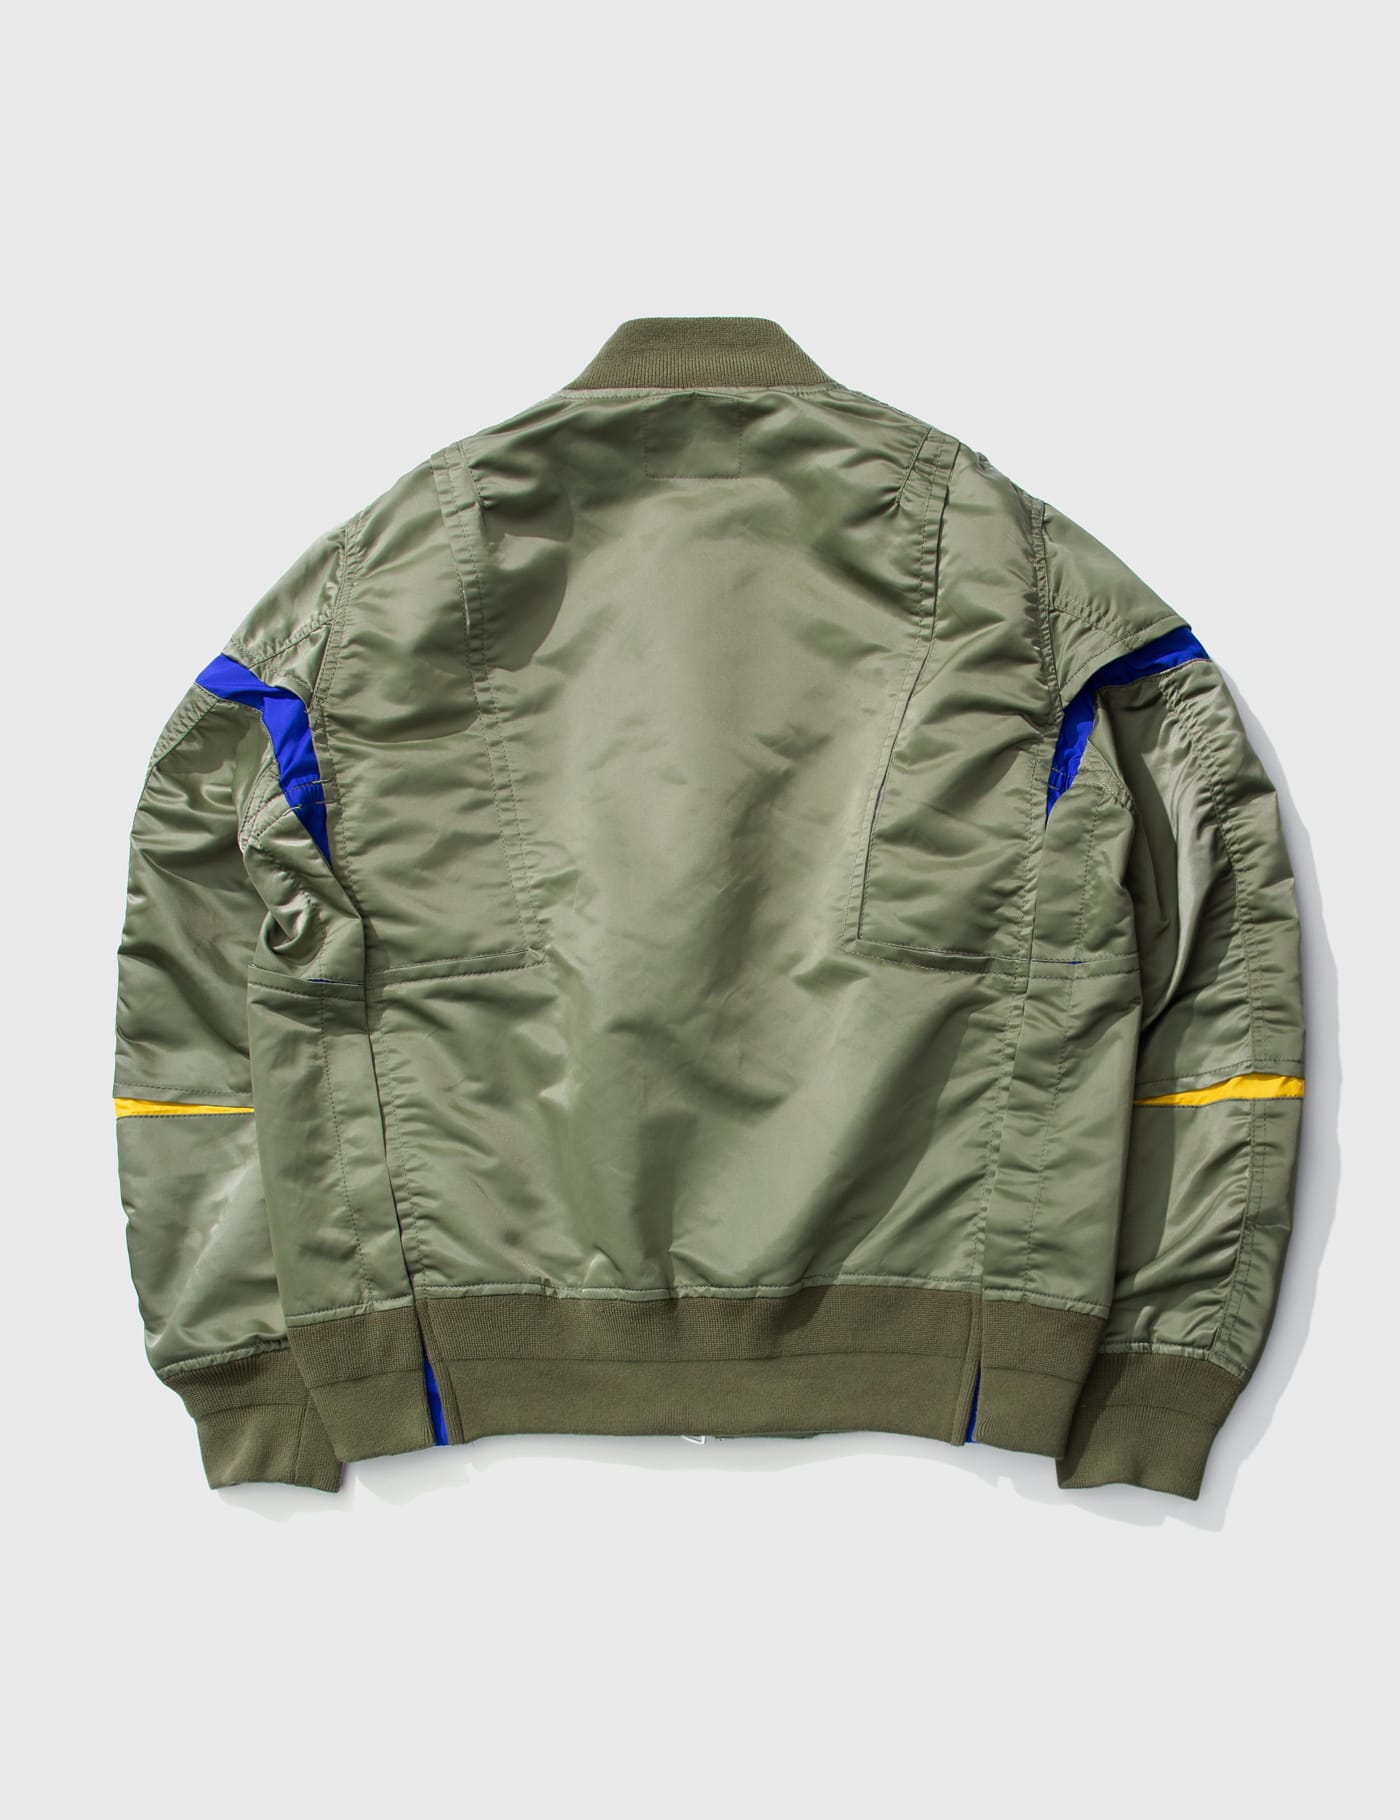 Sacai - Nylon Twill Blouson | HBX - Globally Curated Fashion and Lifestyle  by Hypebeast